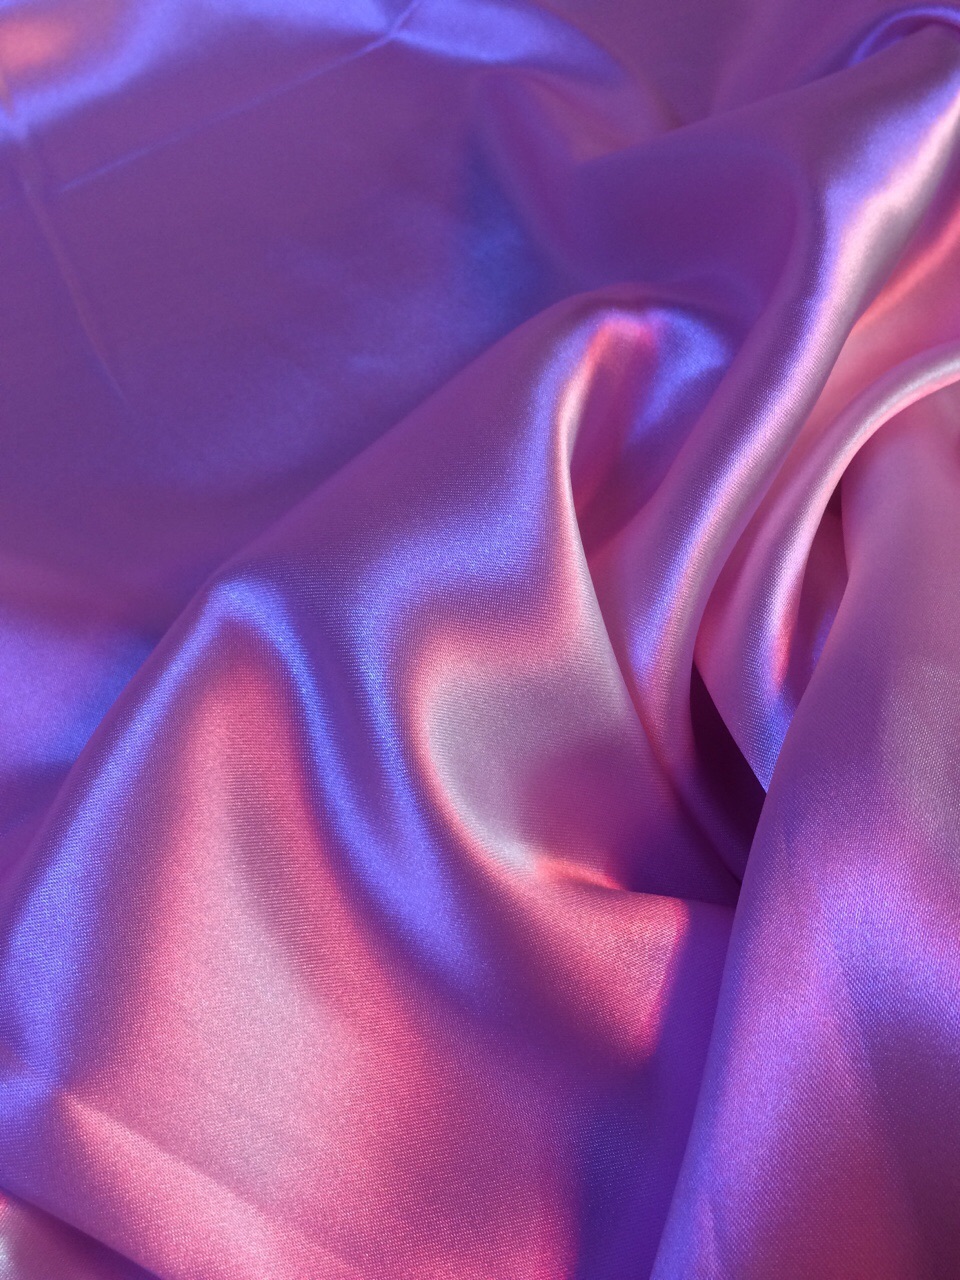 wallpaper, soft and purple